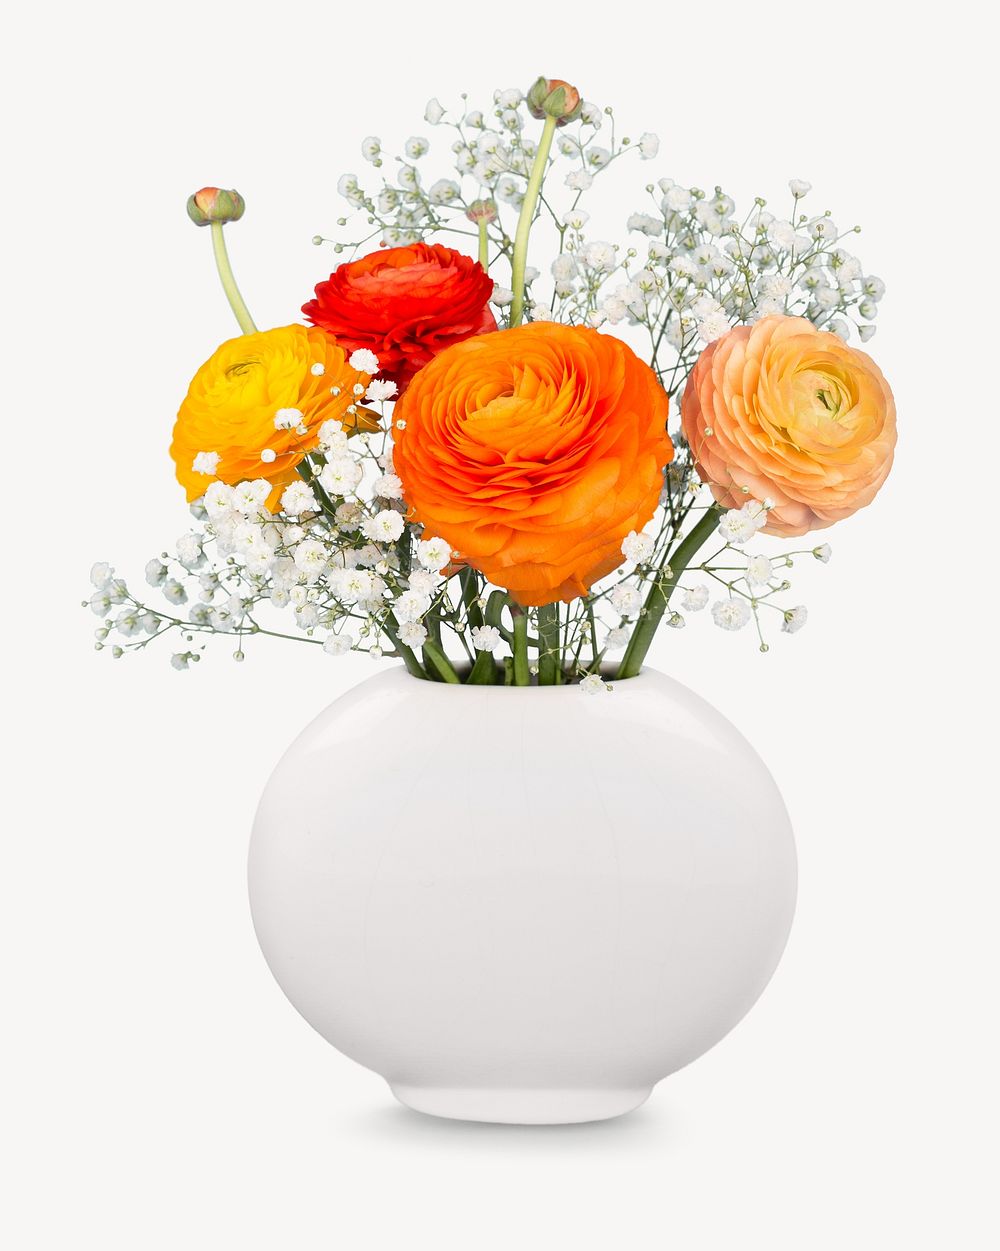 Persian buttercup in vase collage element isolated image